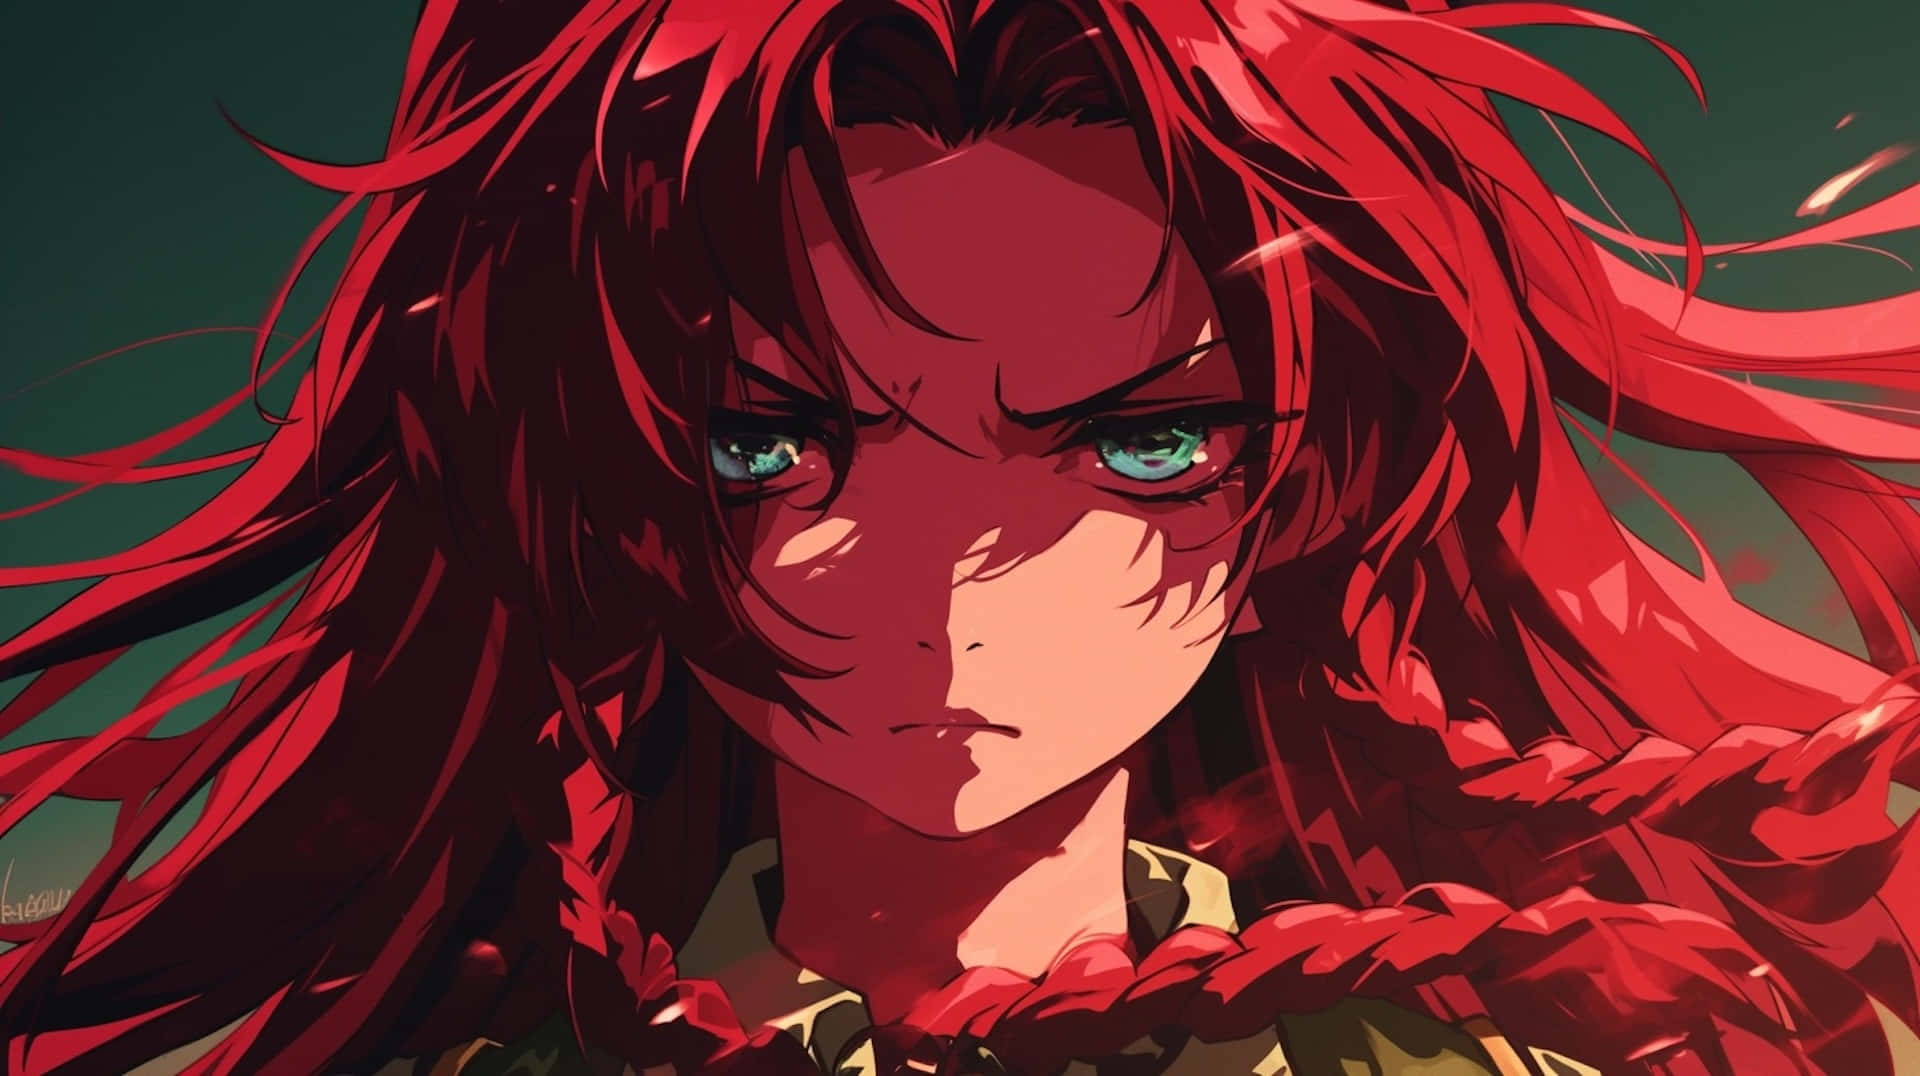 Intense Red Haired Anime Character Wallpaper